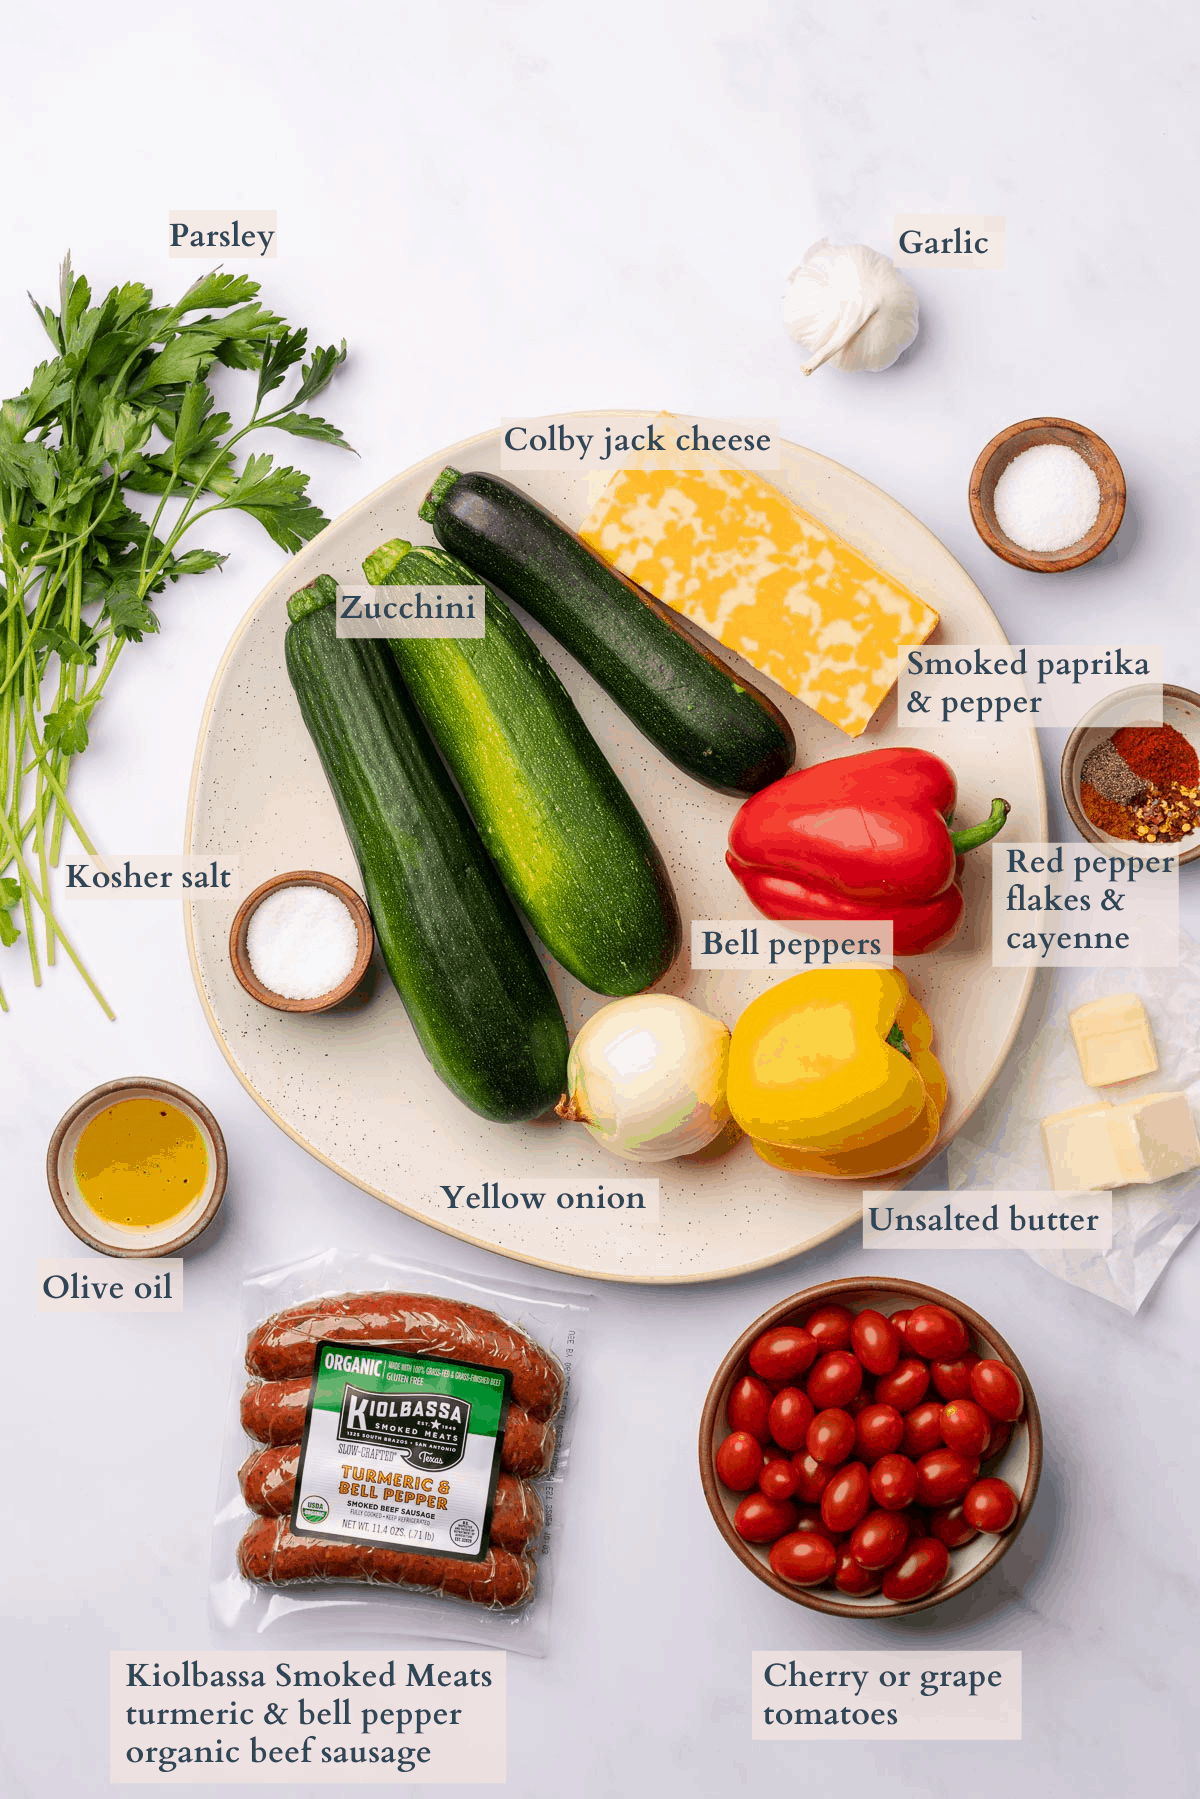 all of the ingredients for baked zucchini noodles casserole in one photo with text to denote the different ingredients